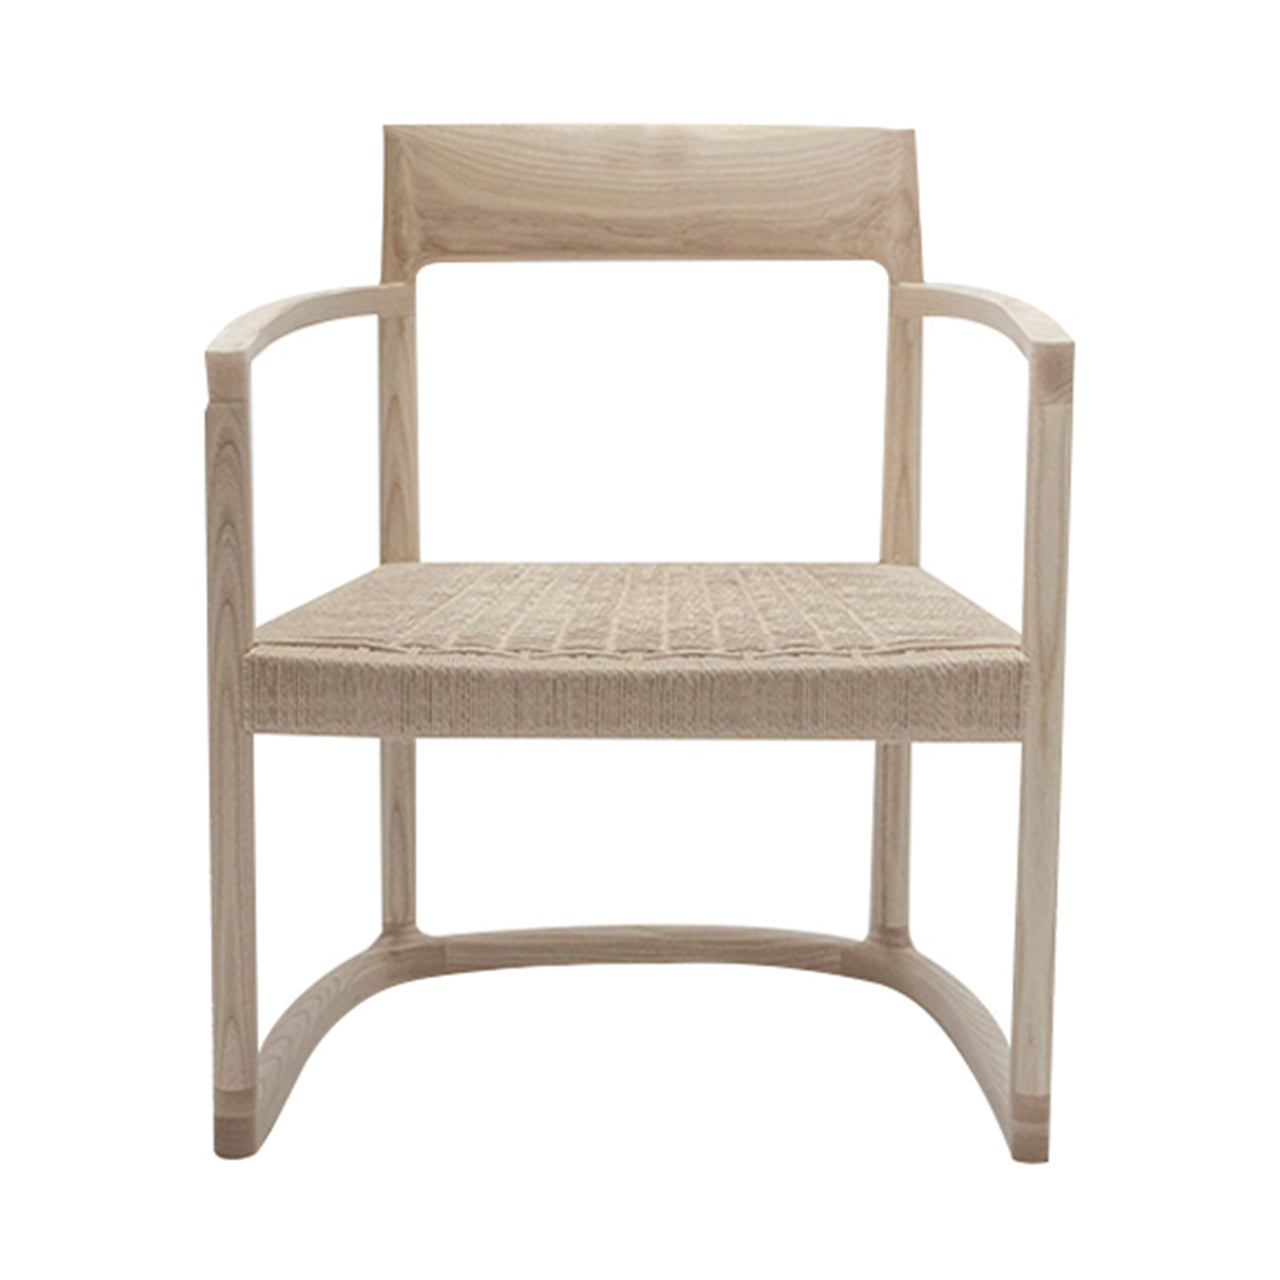 Sweepy Lounge Chair: Natural Ash